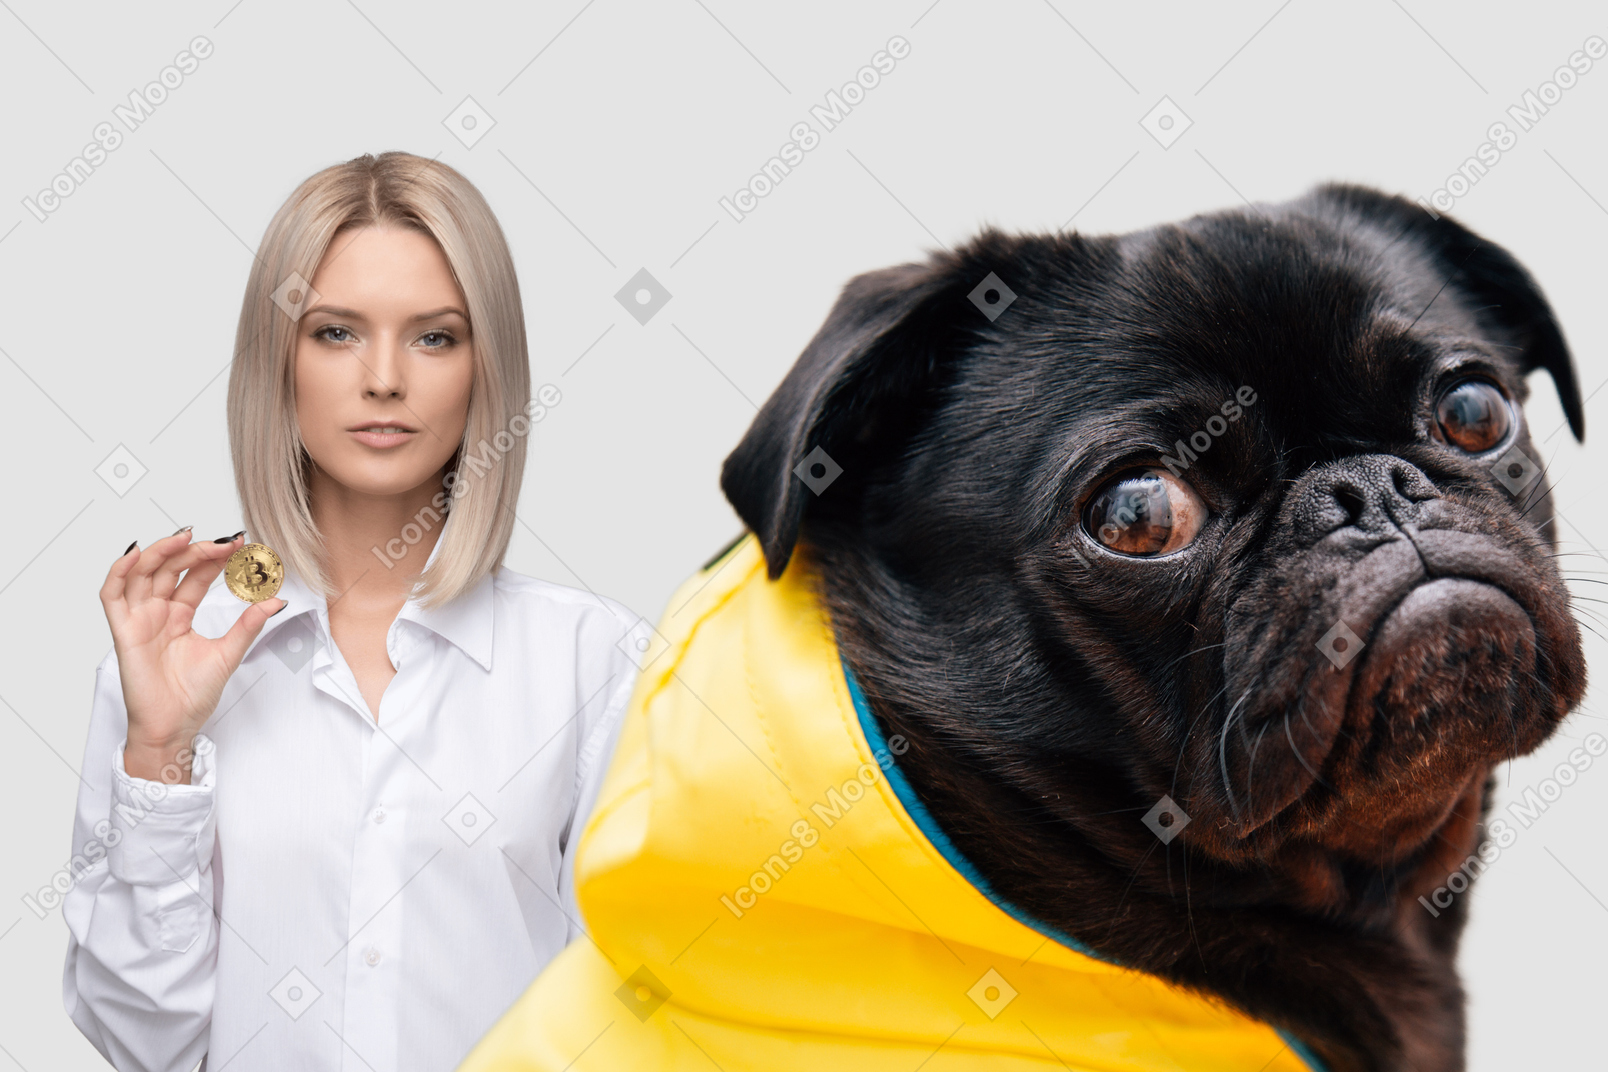 Female veterinarian holding a dog in front of her mouth